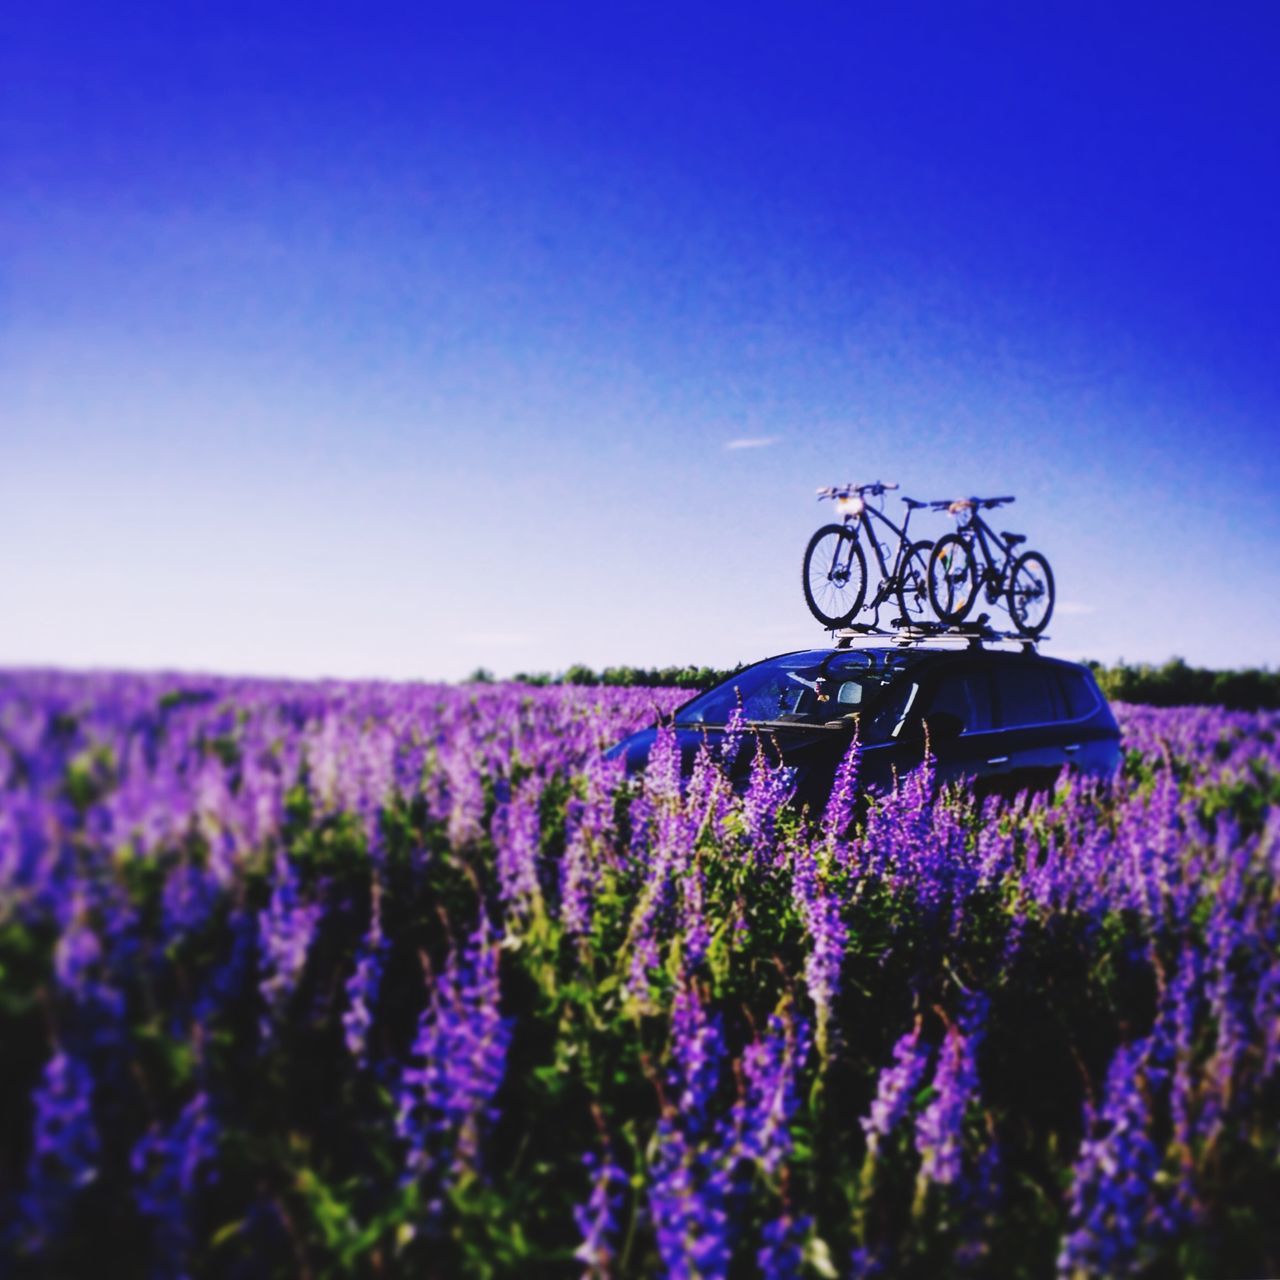 blue, clear sky, flower, copy space, purple, plant, field, beauty in nature, nature, tranquility, landscape, growth, outdoors, sky, day, tranquil scene, bicycle, no people, fragility, scenics